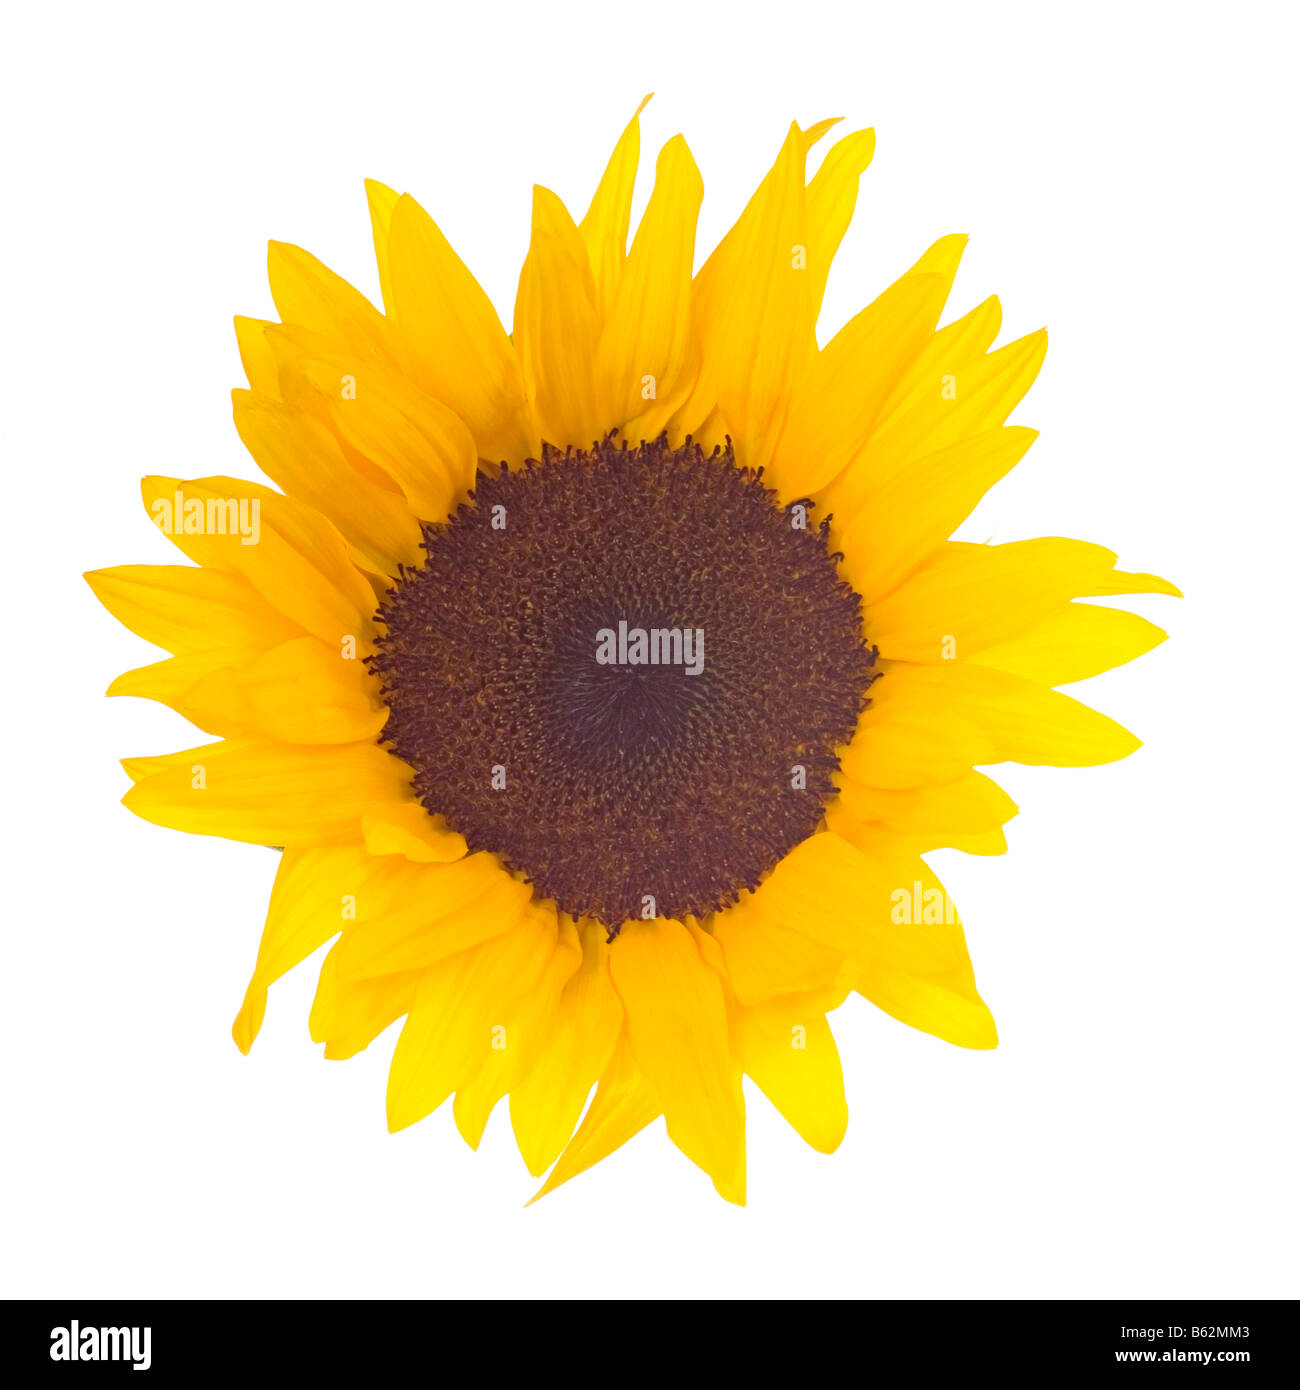 A bright yellow sunflower (helianthus annuus) on a pure white background. Stock Photo